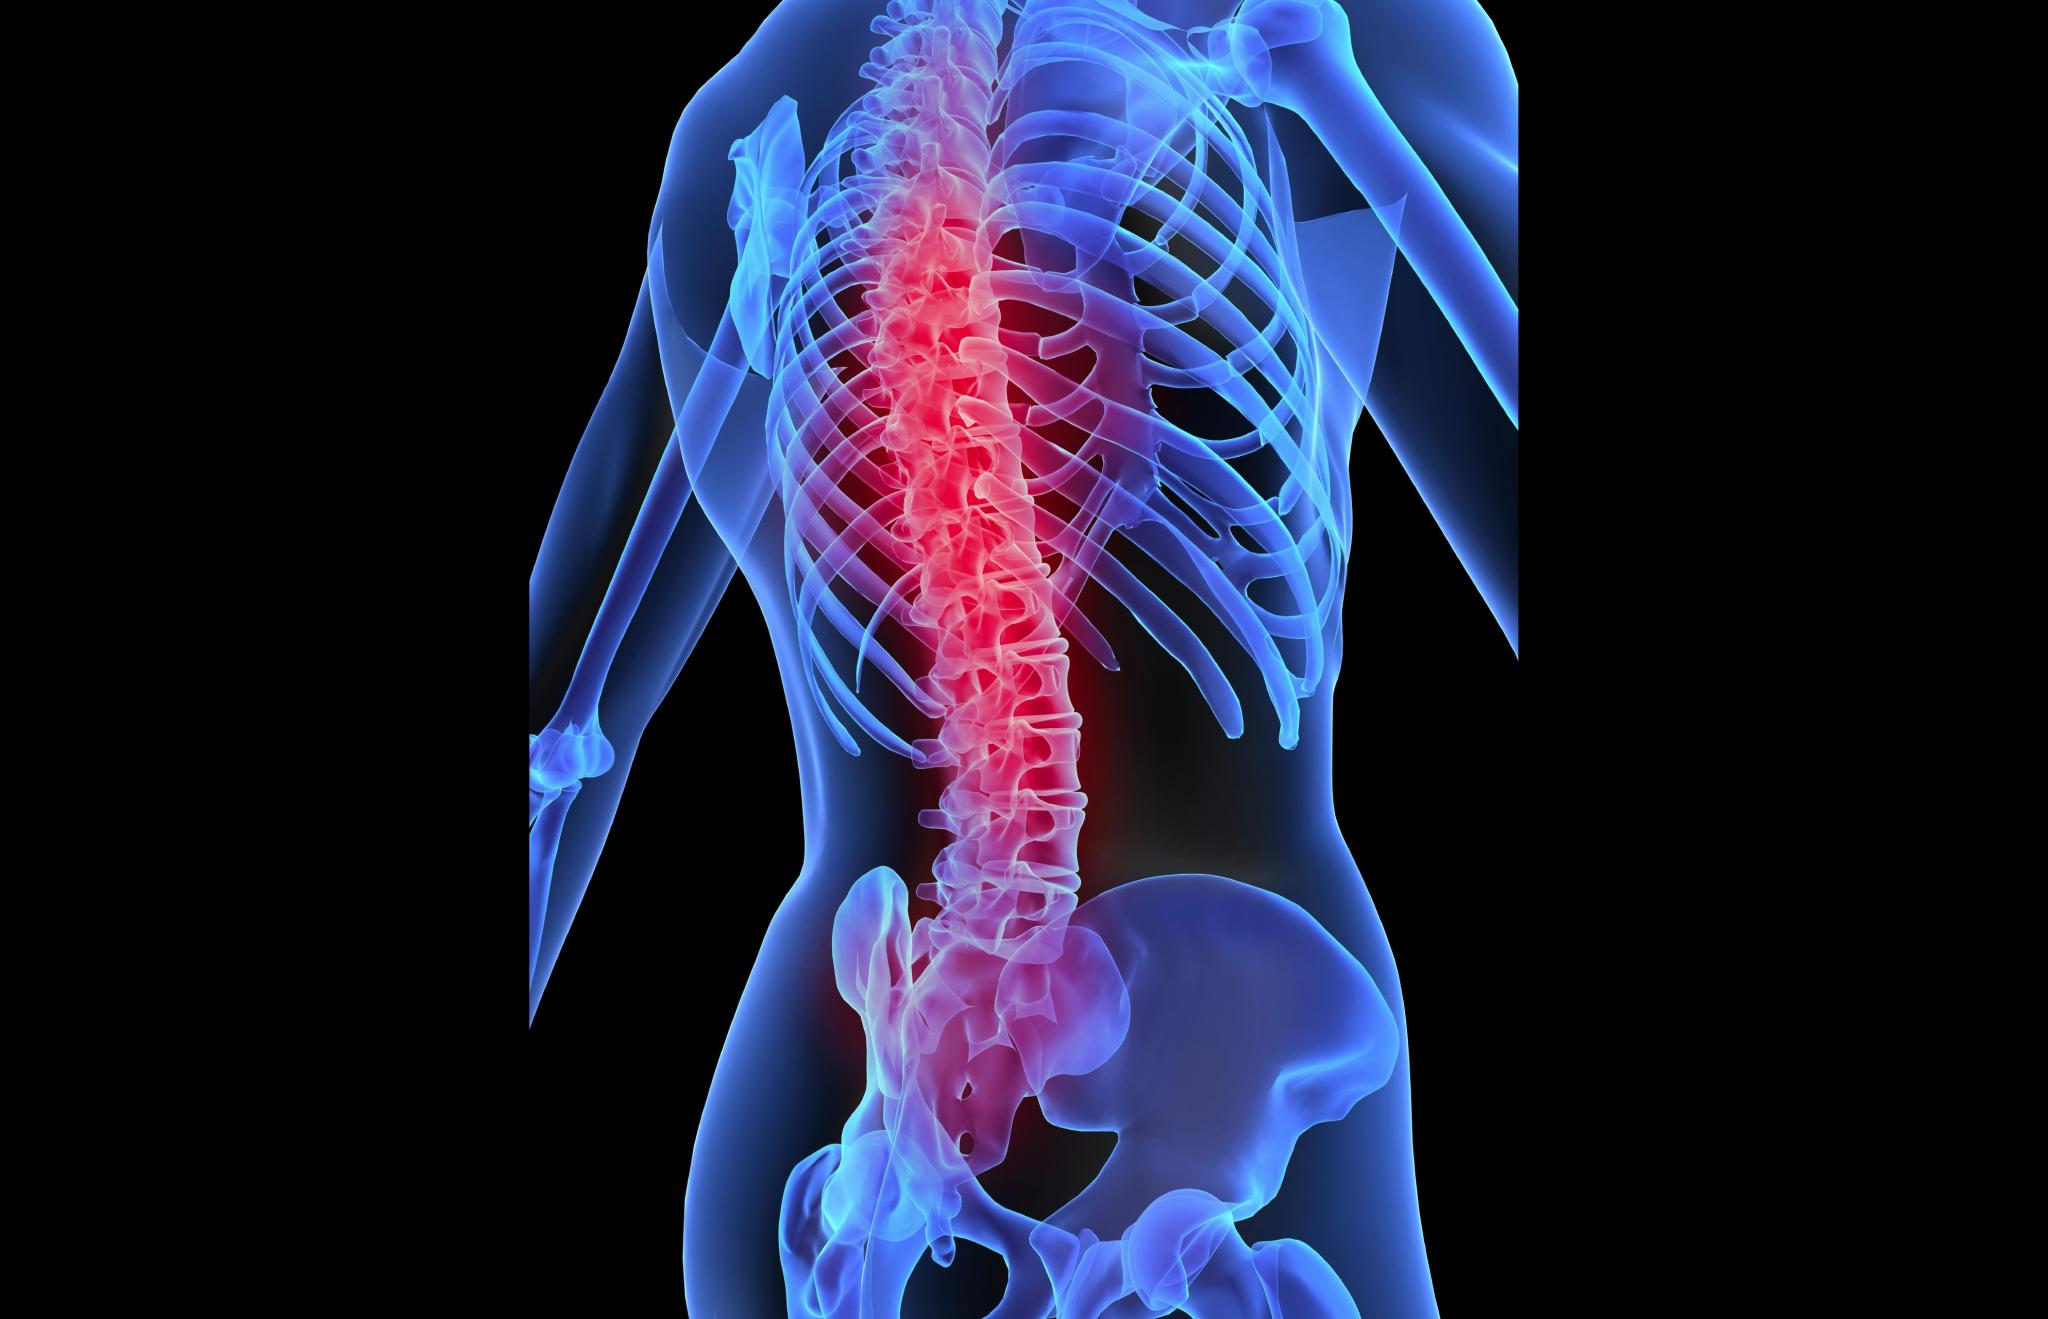 Can 2nd-tier spinal companies grow in a challenging sector?